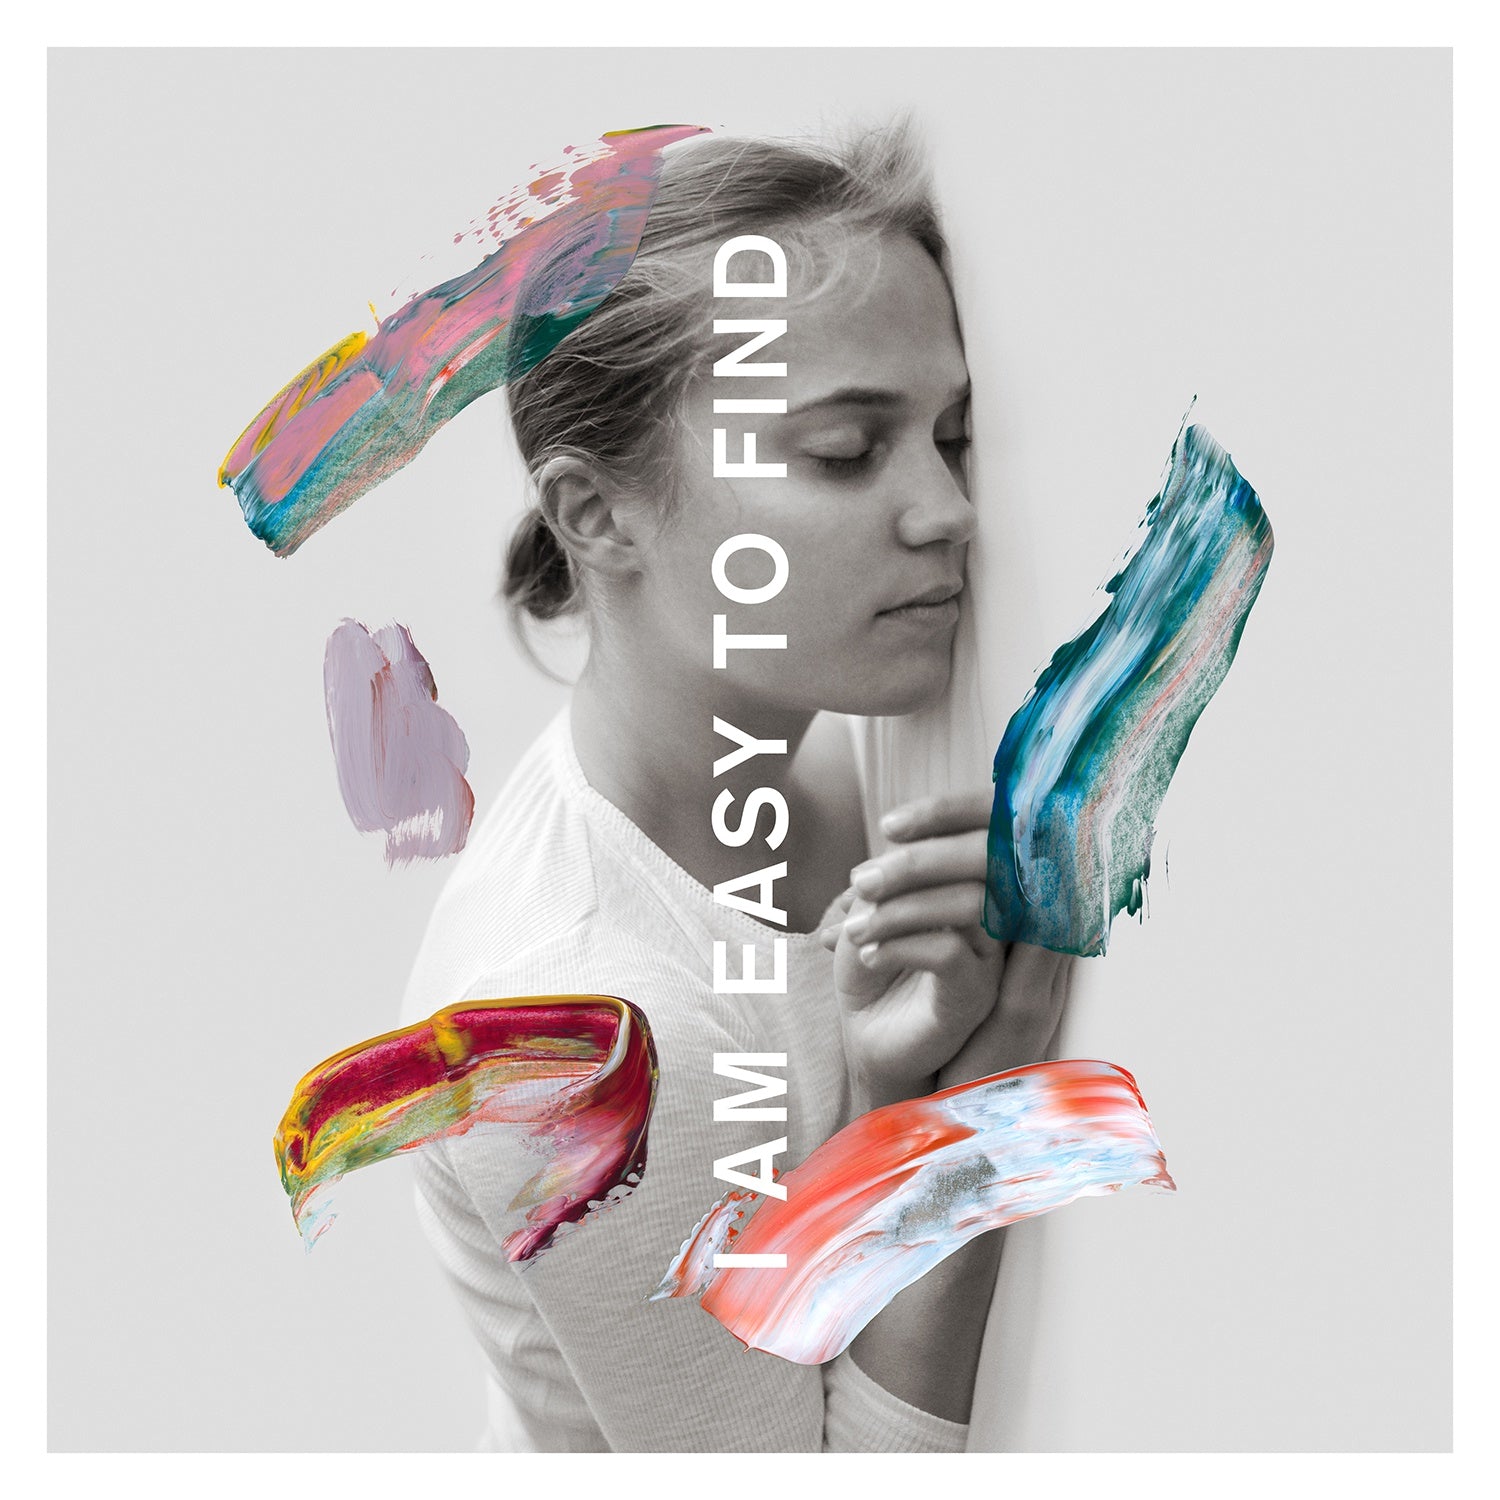 The National - I Am Easy To Find - New 3 LP Record 2019 USA 4AD Yellow / Red / Grey Vinyl, Book, Poster & Download - Indie Rock / Alternative Rock